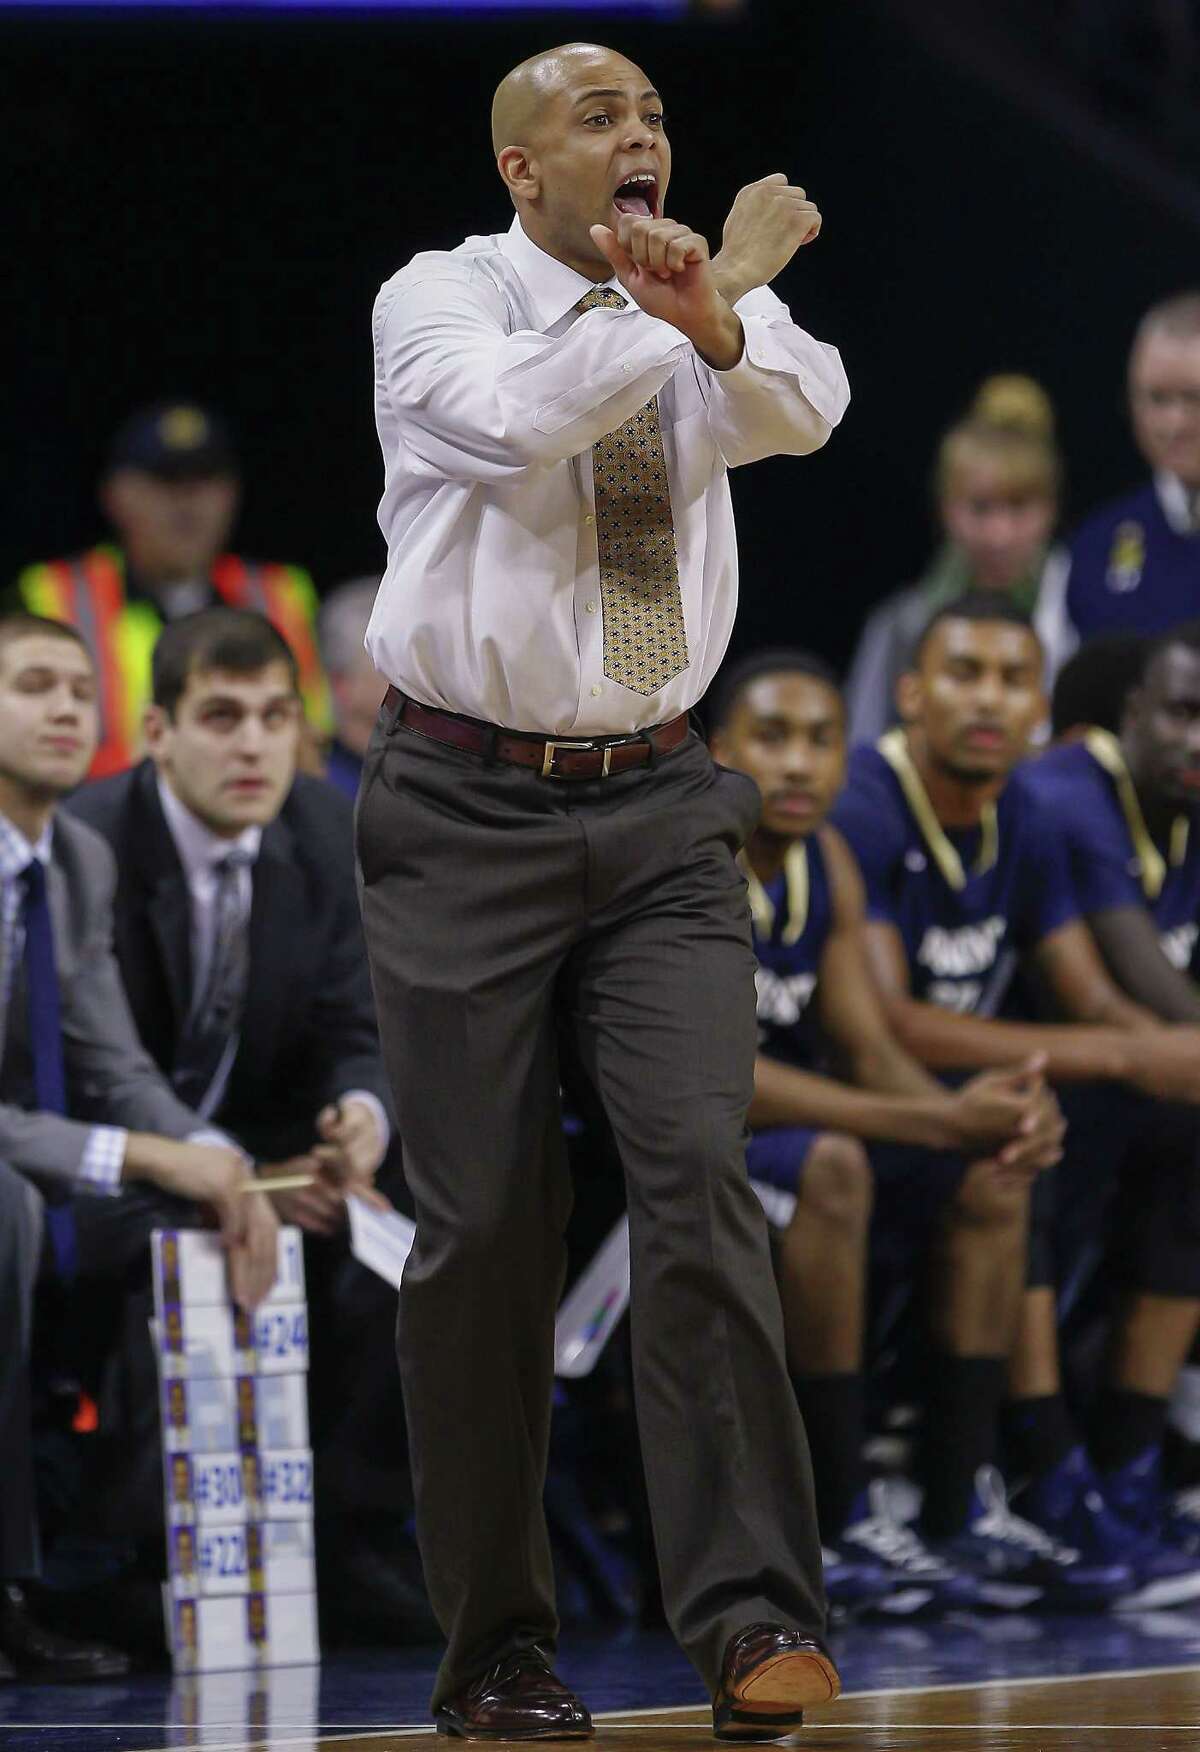 SOUTH BEND, IN - DECEMBER 09: Head coach Jamion Christian of the Mount St. Mary's Mountaineers is seen during the game against the Notre Dame Fighting Irish at Purcell Pavilion on December 9, 2014 in South Bend, Indiana. (Photo by Michael Hickey/Getty Images) ORG XMIT: 521949767